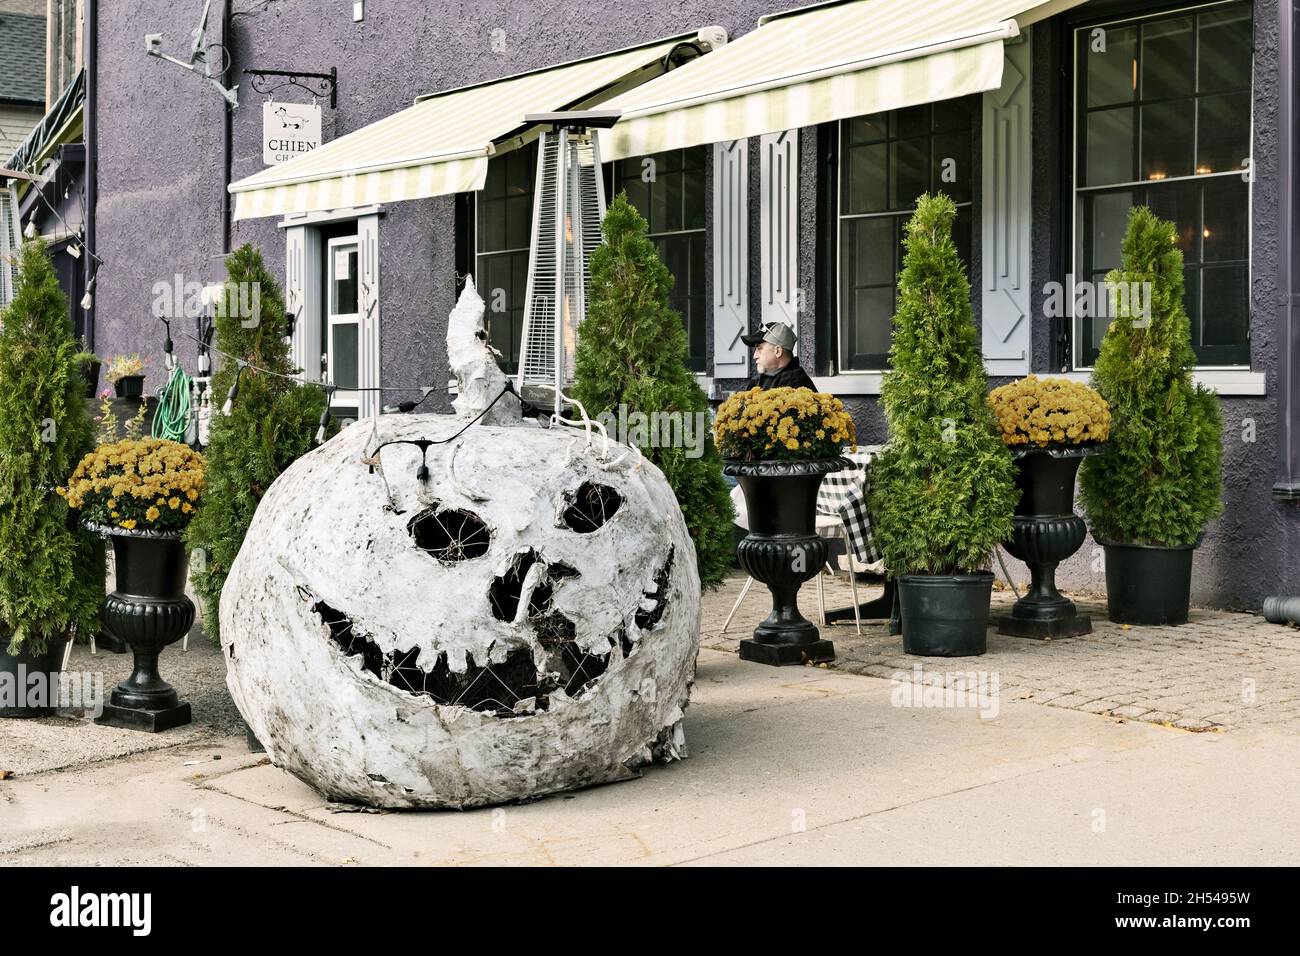 Elora, Ontario, Canada - Oct 17, 2020: Halloween decoration on the street in the town of Elora in Ontario, Canada. Stock Photo